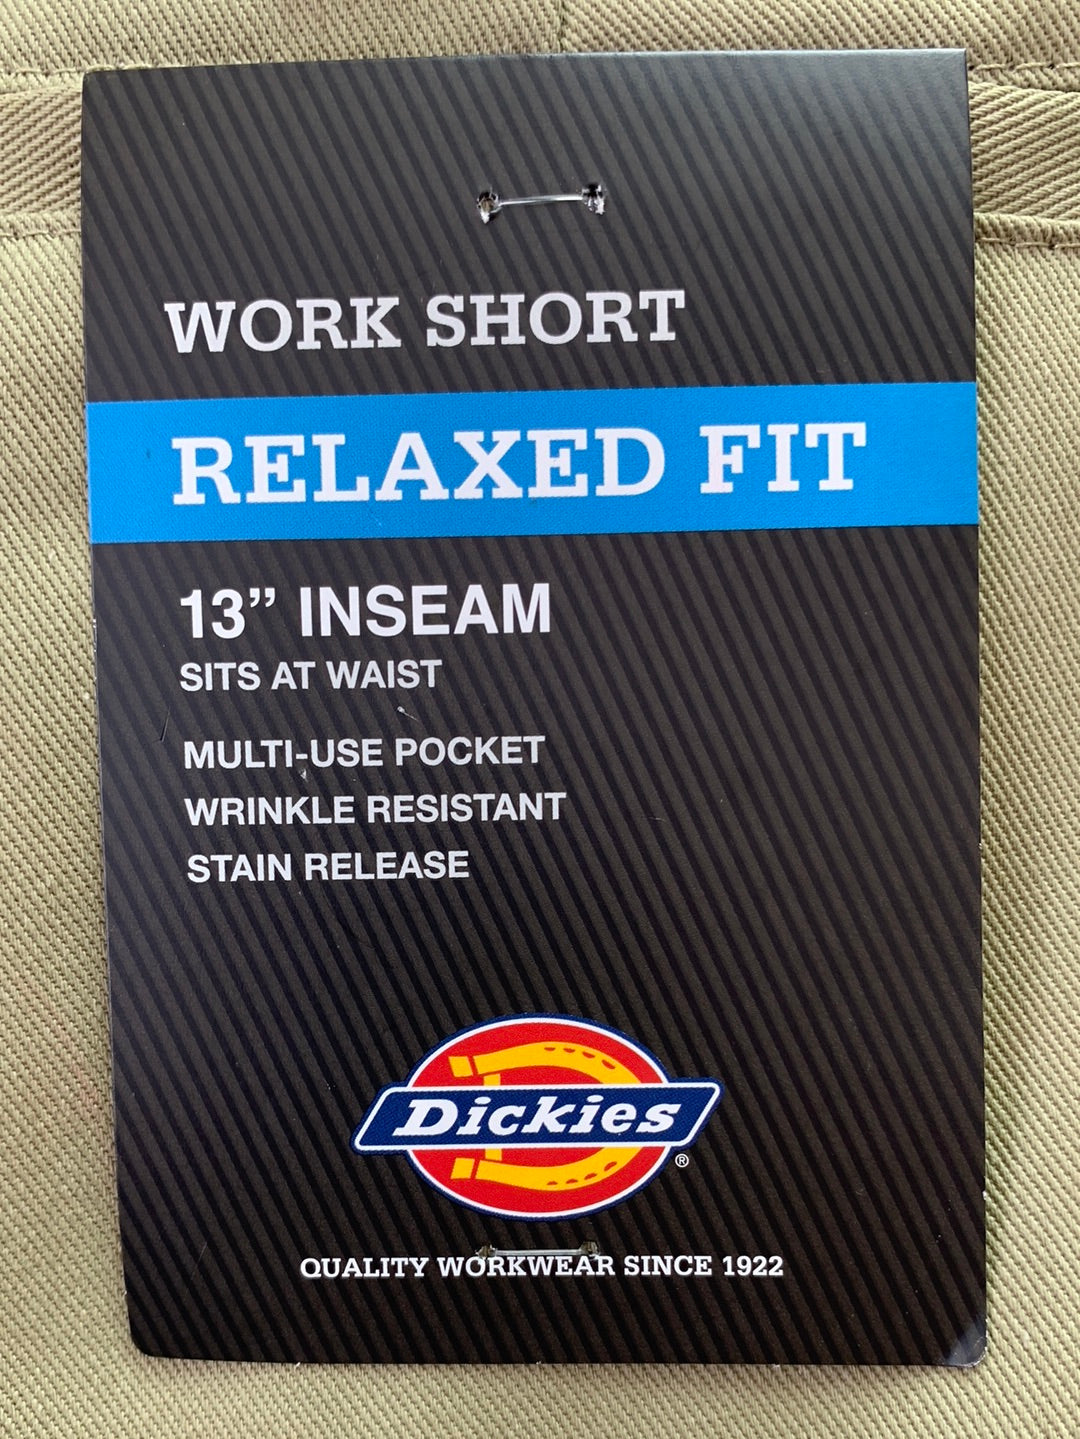 NWT - DICKIES khaki Relaxed Fit 13" Inseam Work Shorts - 38